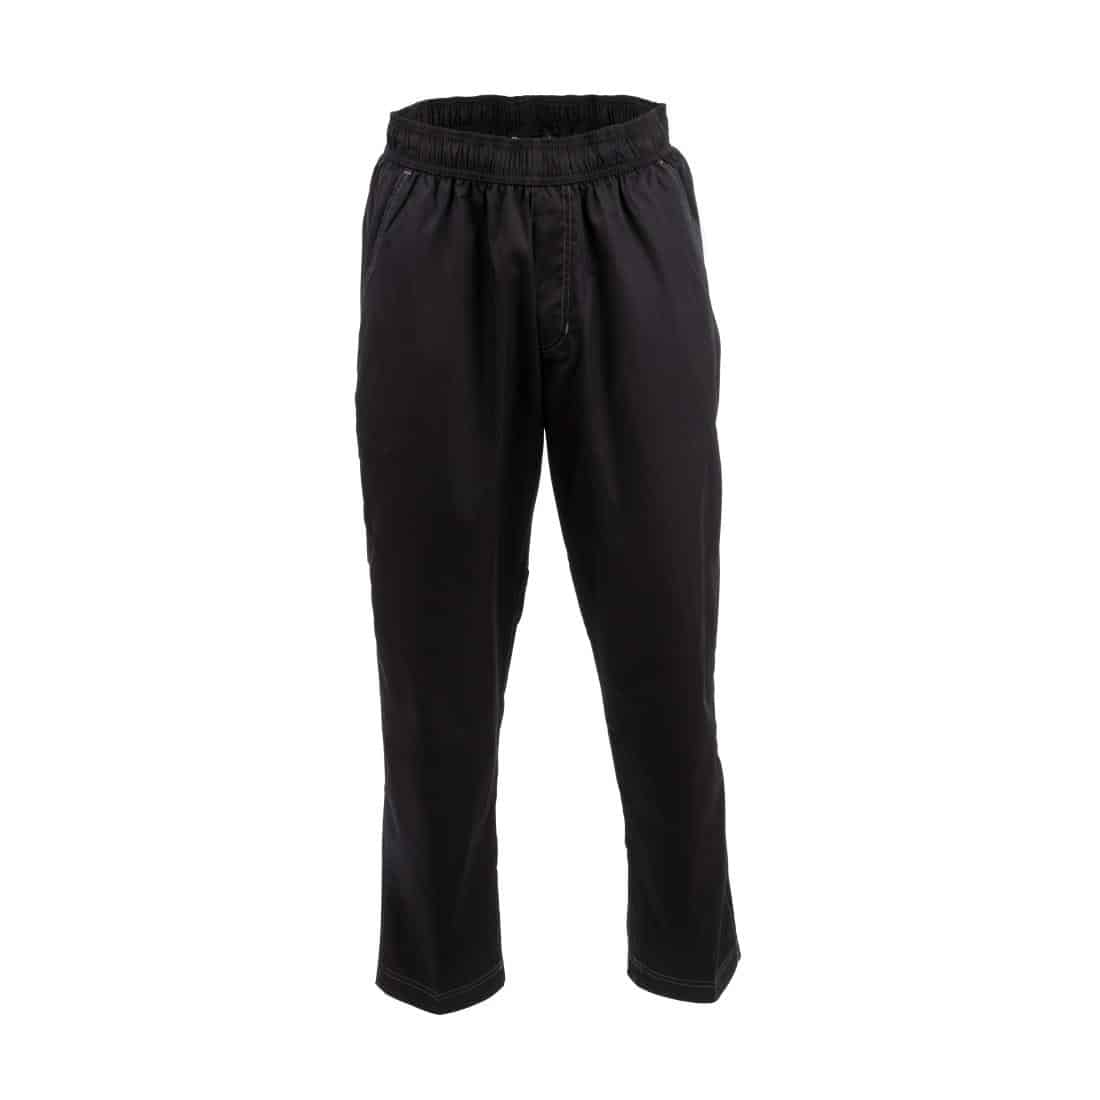 Whites Unisex Vegas Chefs Trousers Black and White Check XL - Catering  products, Equipment & PPE Supplies